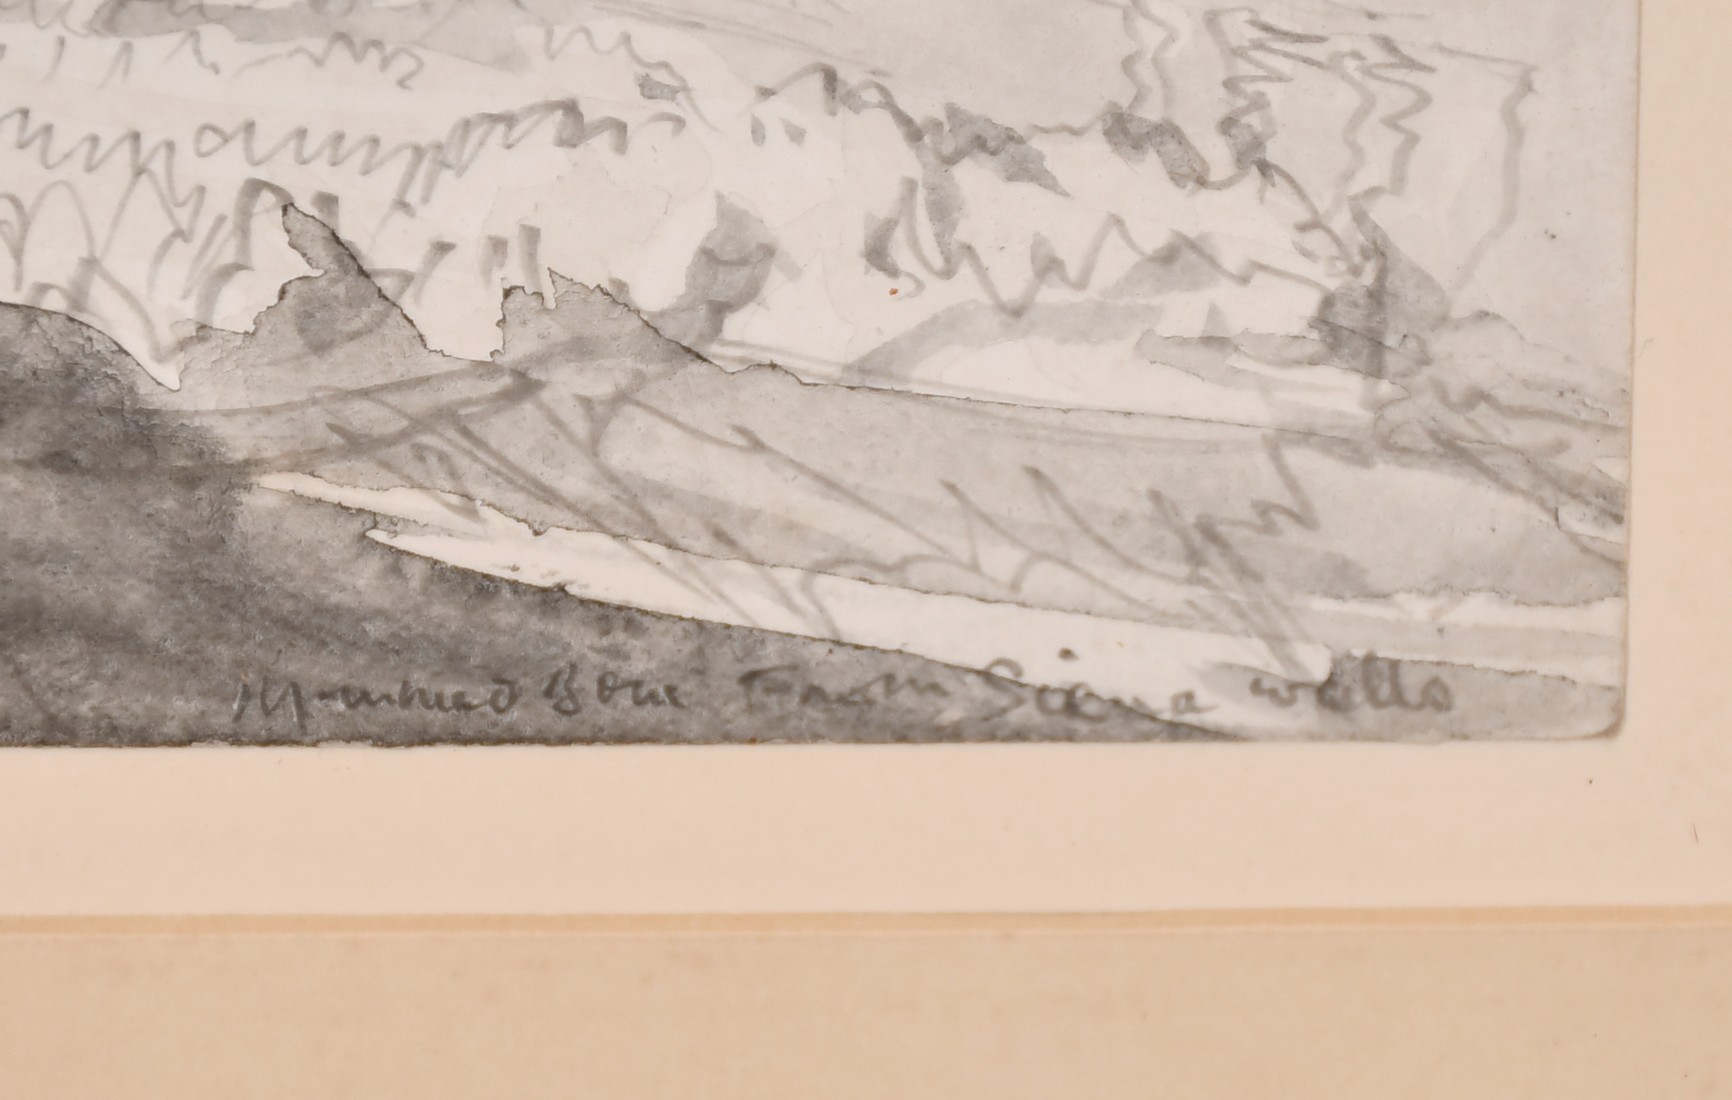 Muirhead Bone, 'From Sienna Walls', pencil and wash, inscribed, 4.5" x 7", Provenance: T & R Annan & - Image 3 of 4